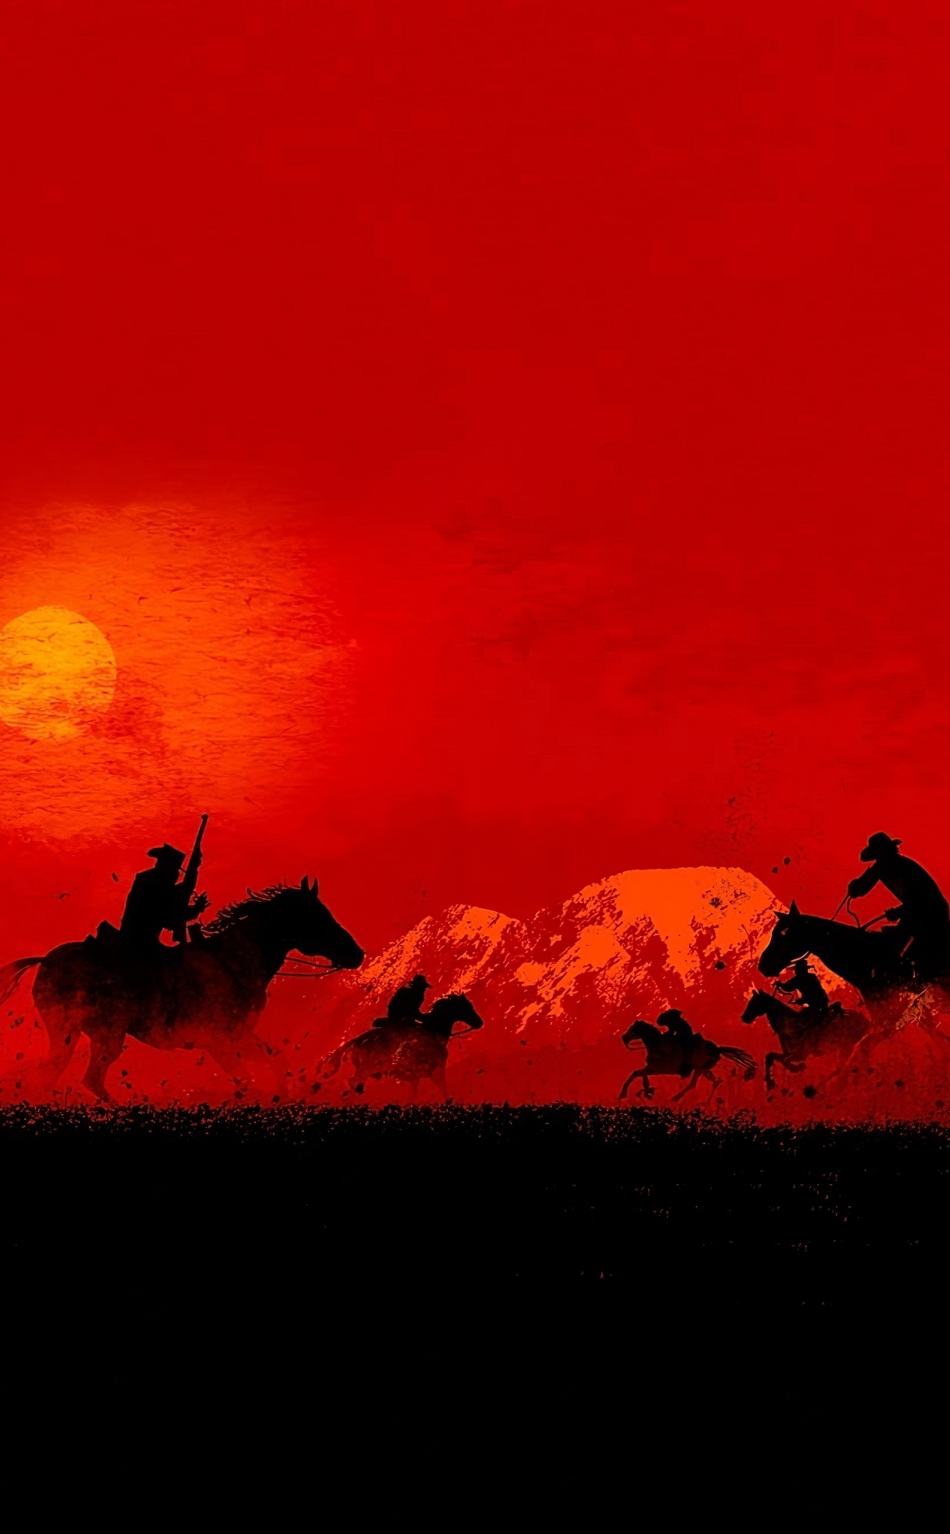 Download 950x1534 wallpaper red dead redemption 2, cowboys, game, 2019